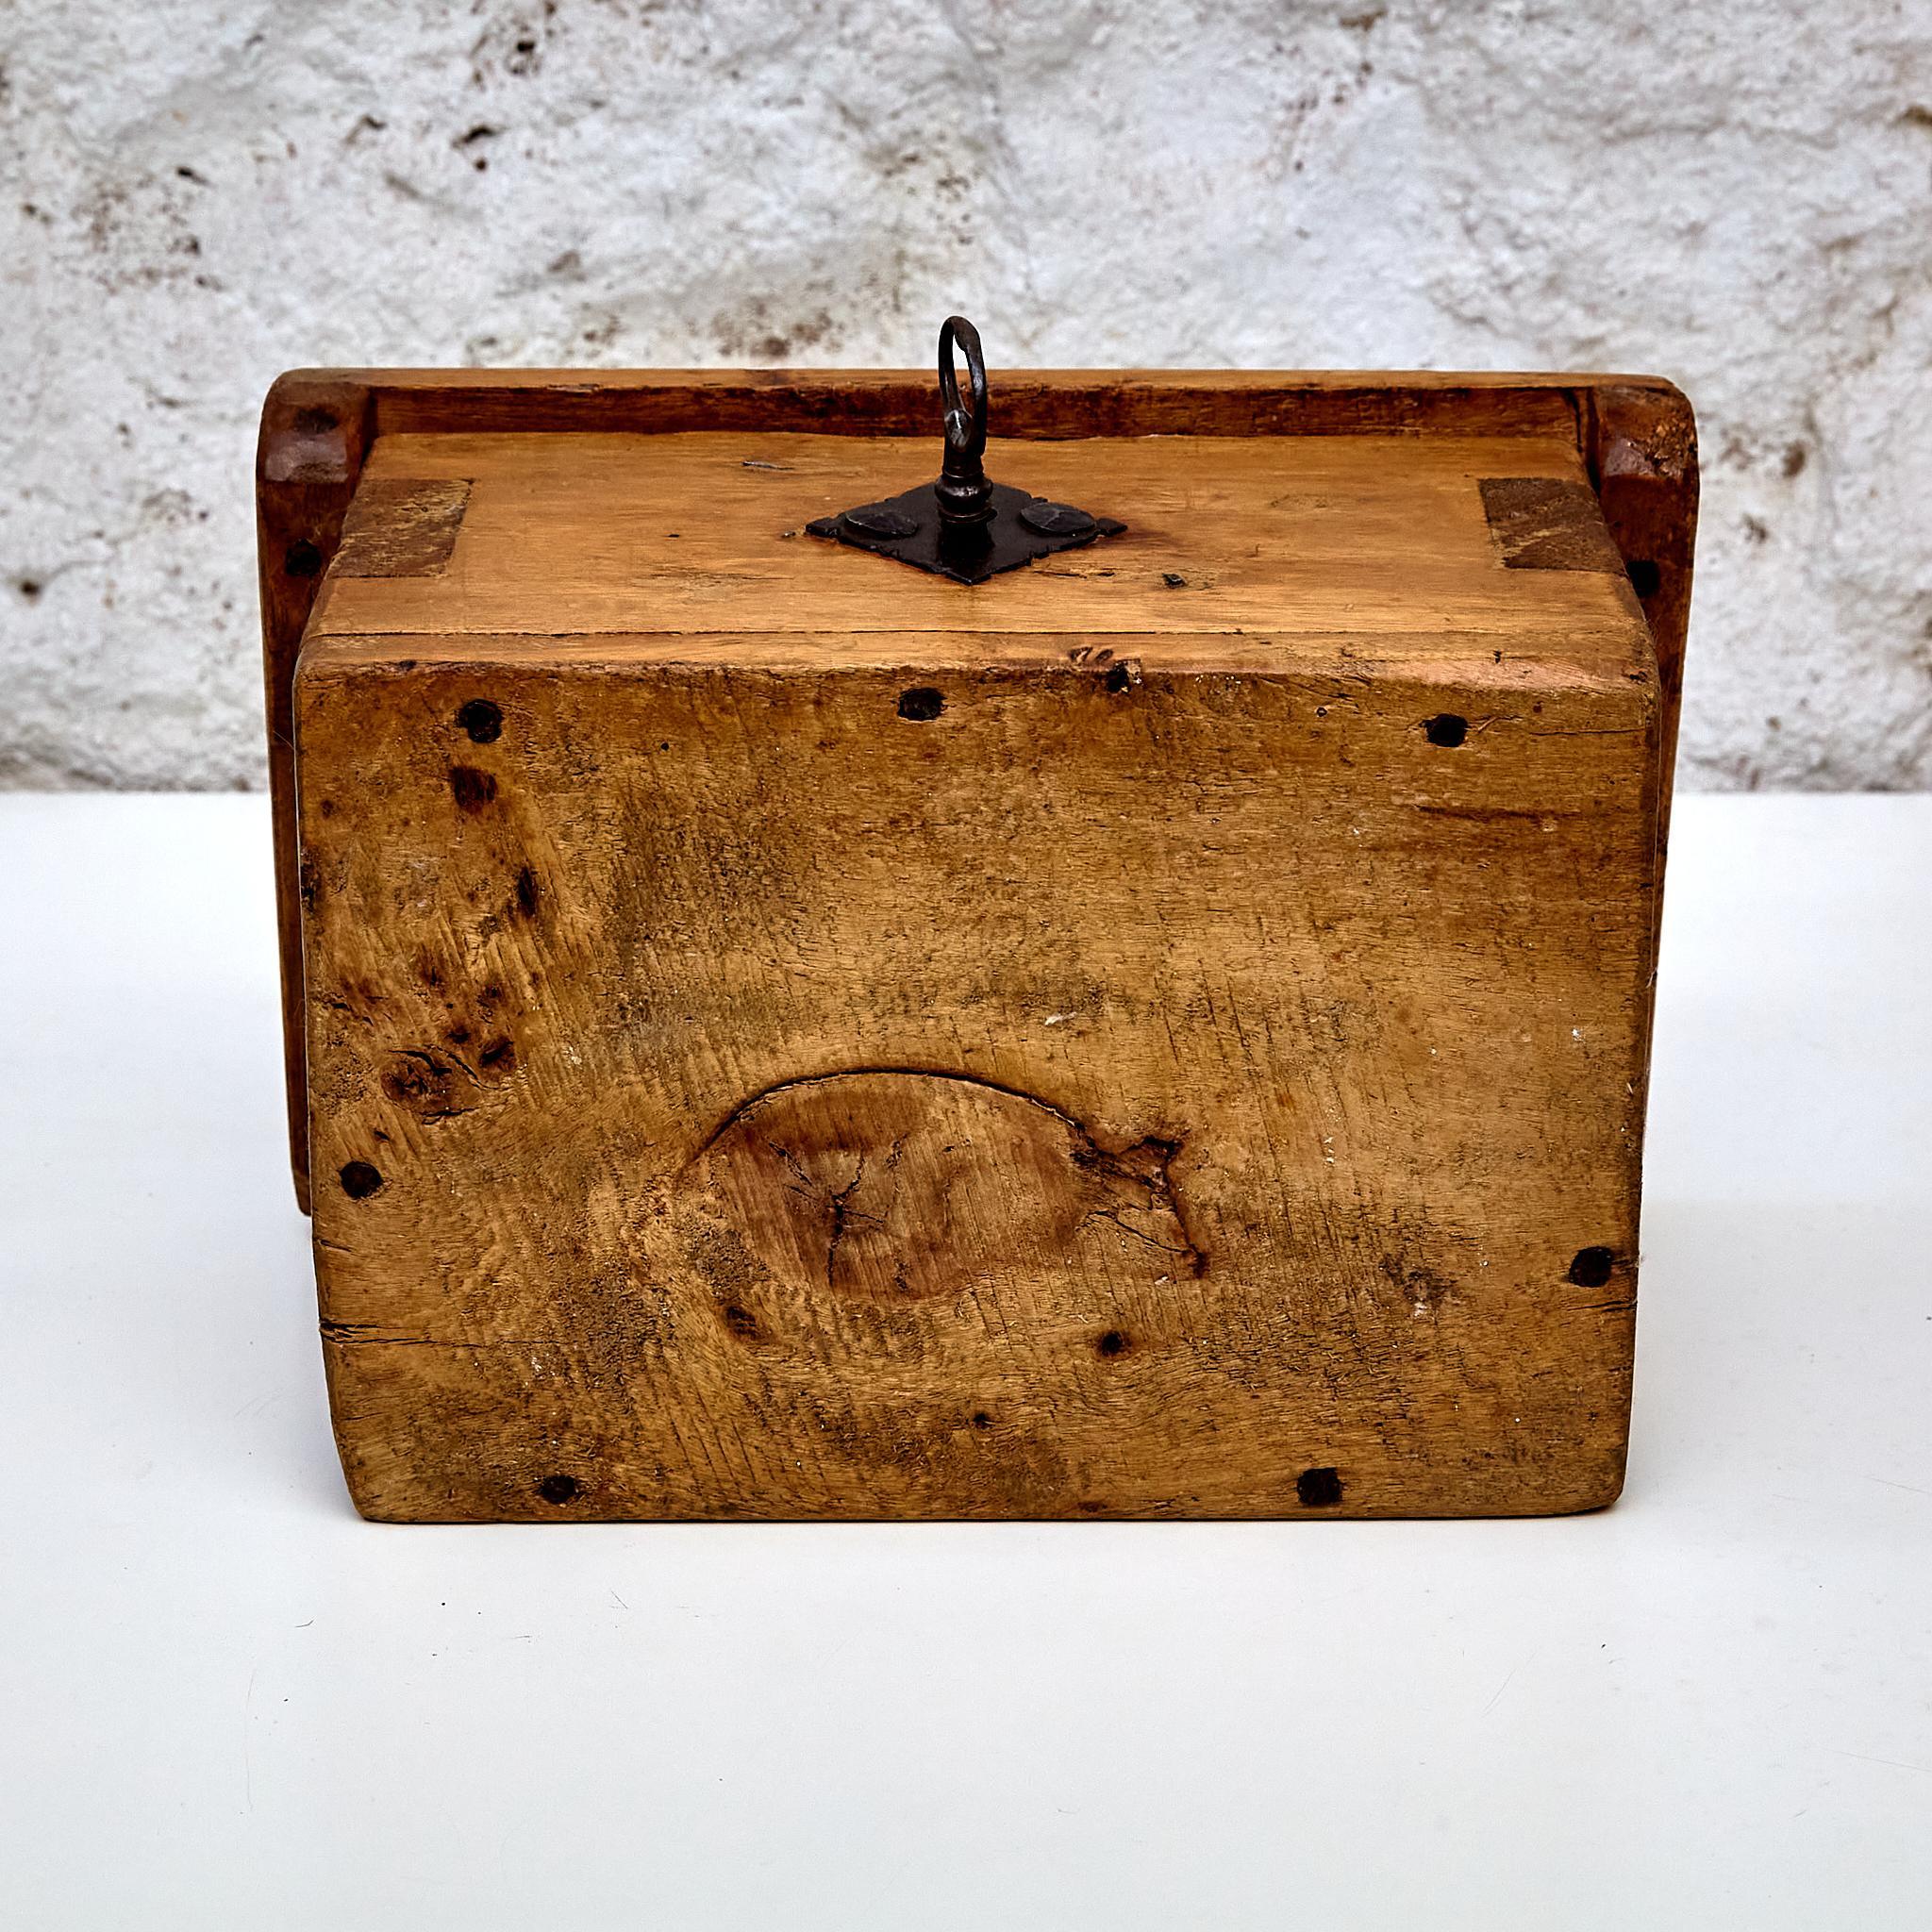 Rustic Wood Box with Key Lock, circa 1930 For Sale 2